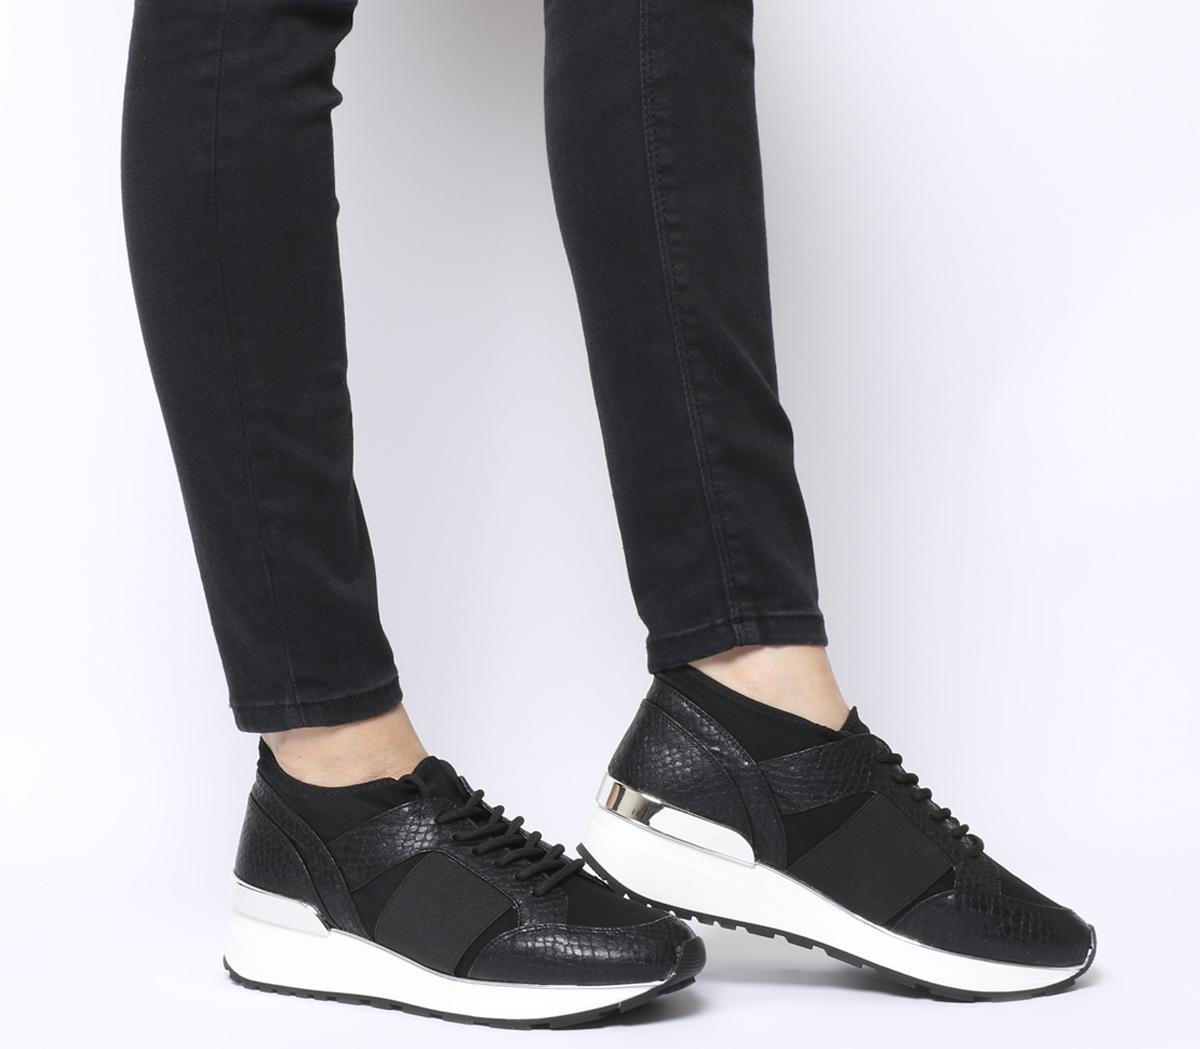 OfficeFella Glam Lace Up RunnersBlack Snake